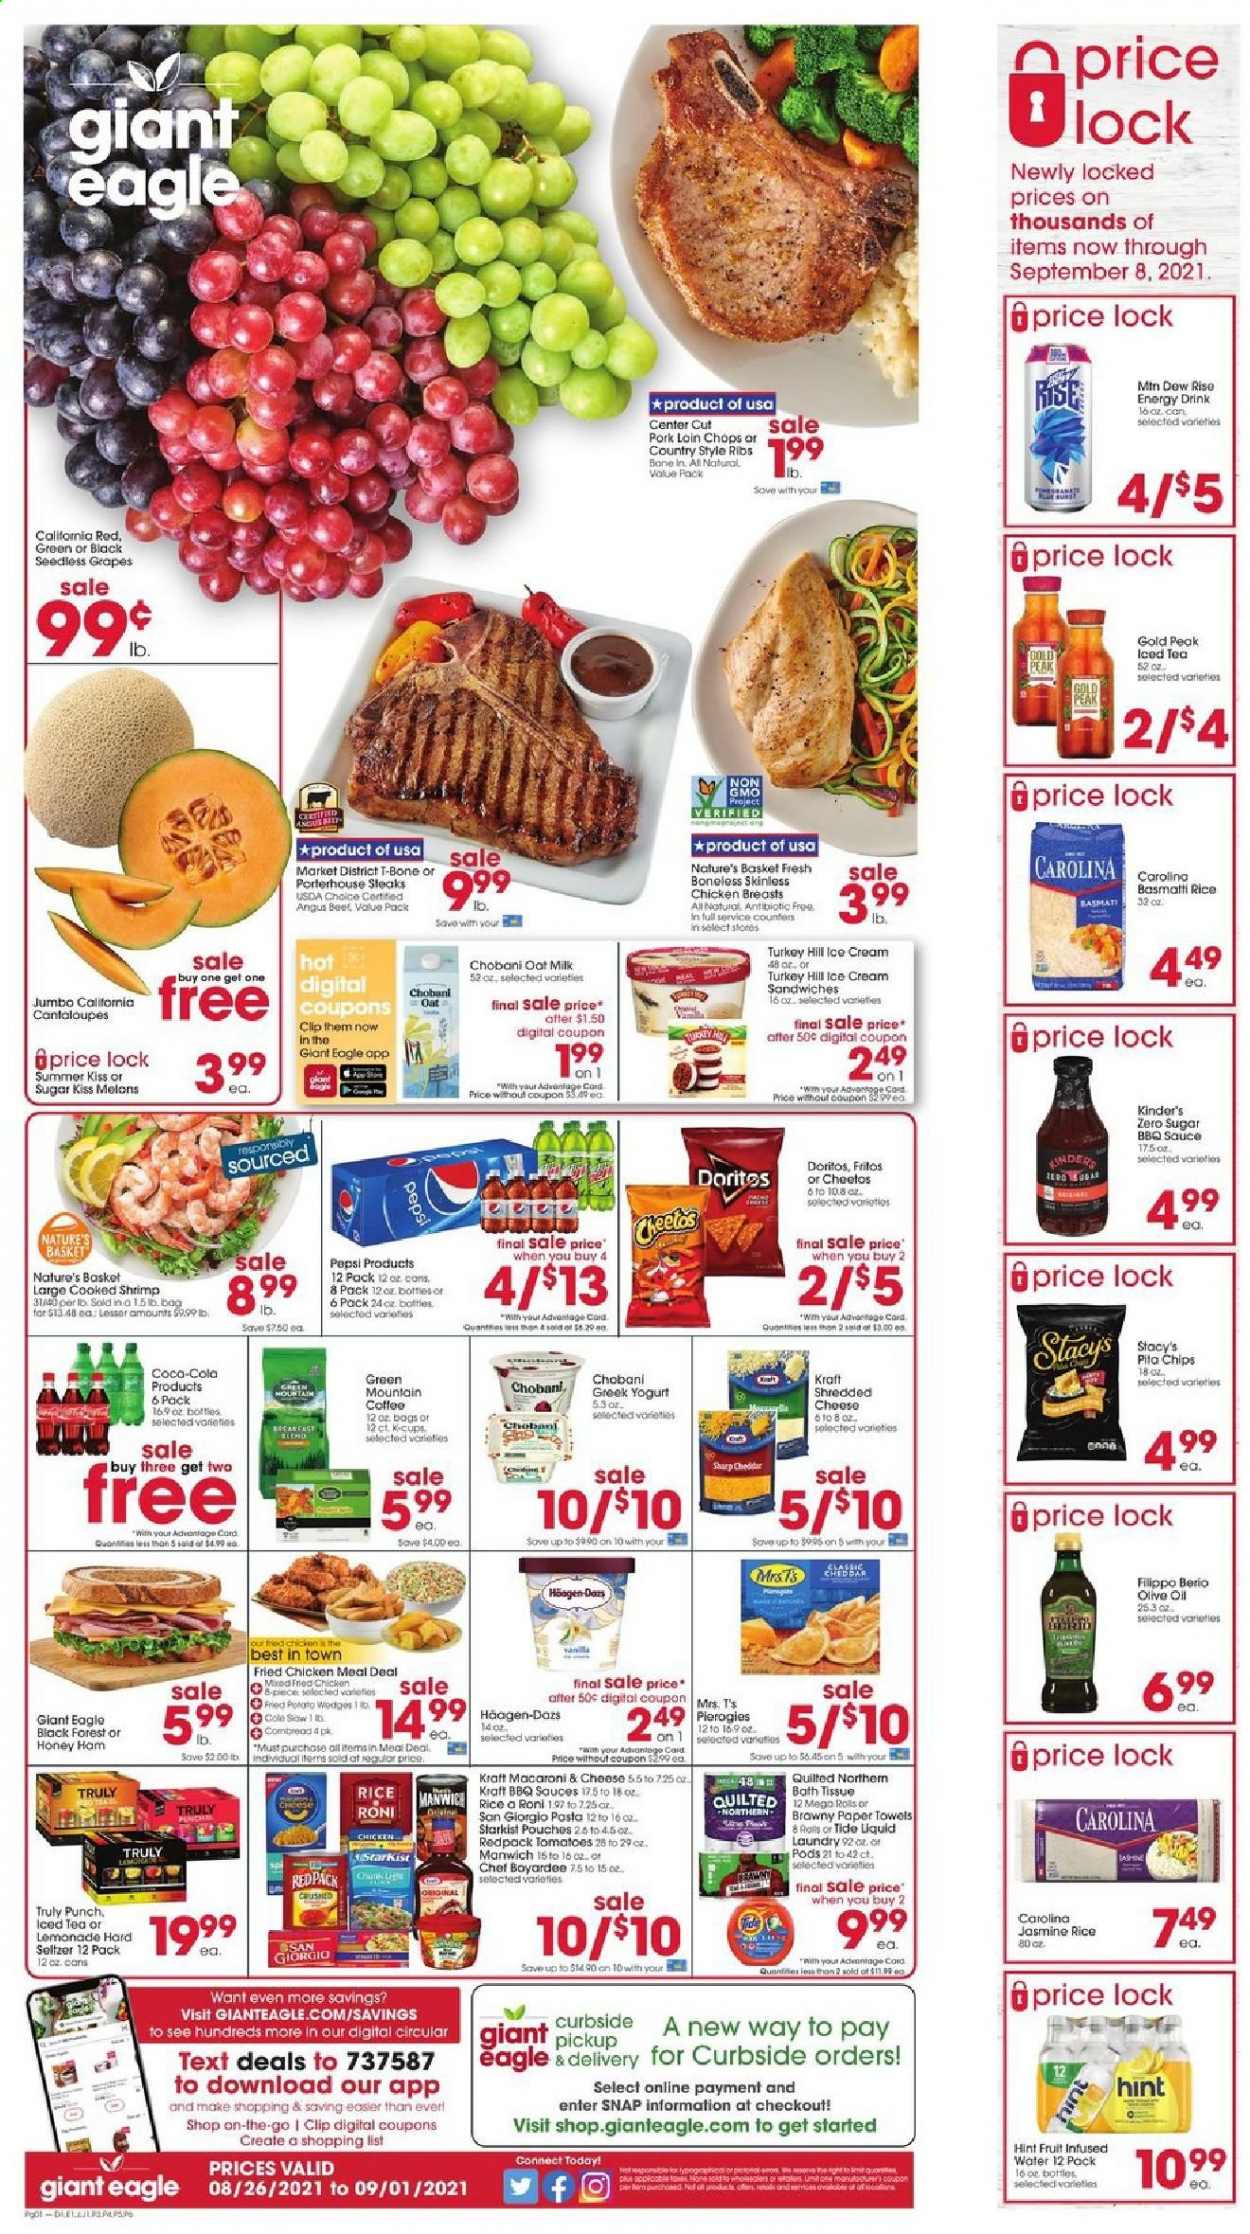 thumbnail - Giant Eagle Flyer - 08/26/2021 - 09/01/2021 - Sales products - seedless grapes, cantaloupe, tomatoes, grapes, pears, shrimps, StarKist, macaroni & cheese, pasta, fried chicken, Kraft®, ham, greek yoghurt, yoghurt, Chobani, milk, oat milk, ice cream, ice cream sandwich, Häagen-Dazs, Doritos, Fritos, Cheetos, chips, pita chips, Manwich, Chef Boyardee, basmati rice, rice, jasmine rice, BBQ sauce, olive oil, oil, lemonade, Mountain Dew, Pepsi, energy drink, ice tea, coffee, coffee capsules, K-Cups, Green Mountain, punch, TRULY, beef meat, t-bone steak, steak, portehouse steak, pork chops, pork loin, pork meat, pork ribs, country style ribs, bath tissue, Quilted Northern, kitchen towels, paper towels, Tide, basket, melons. Page 1.